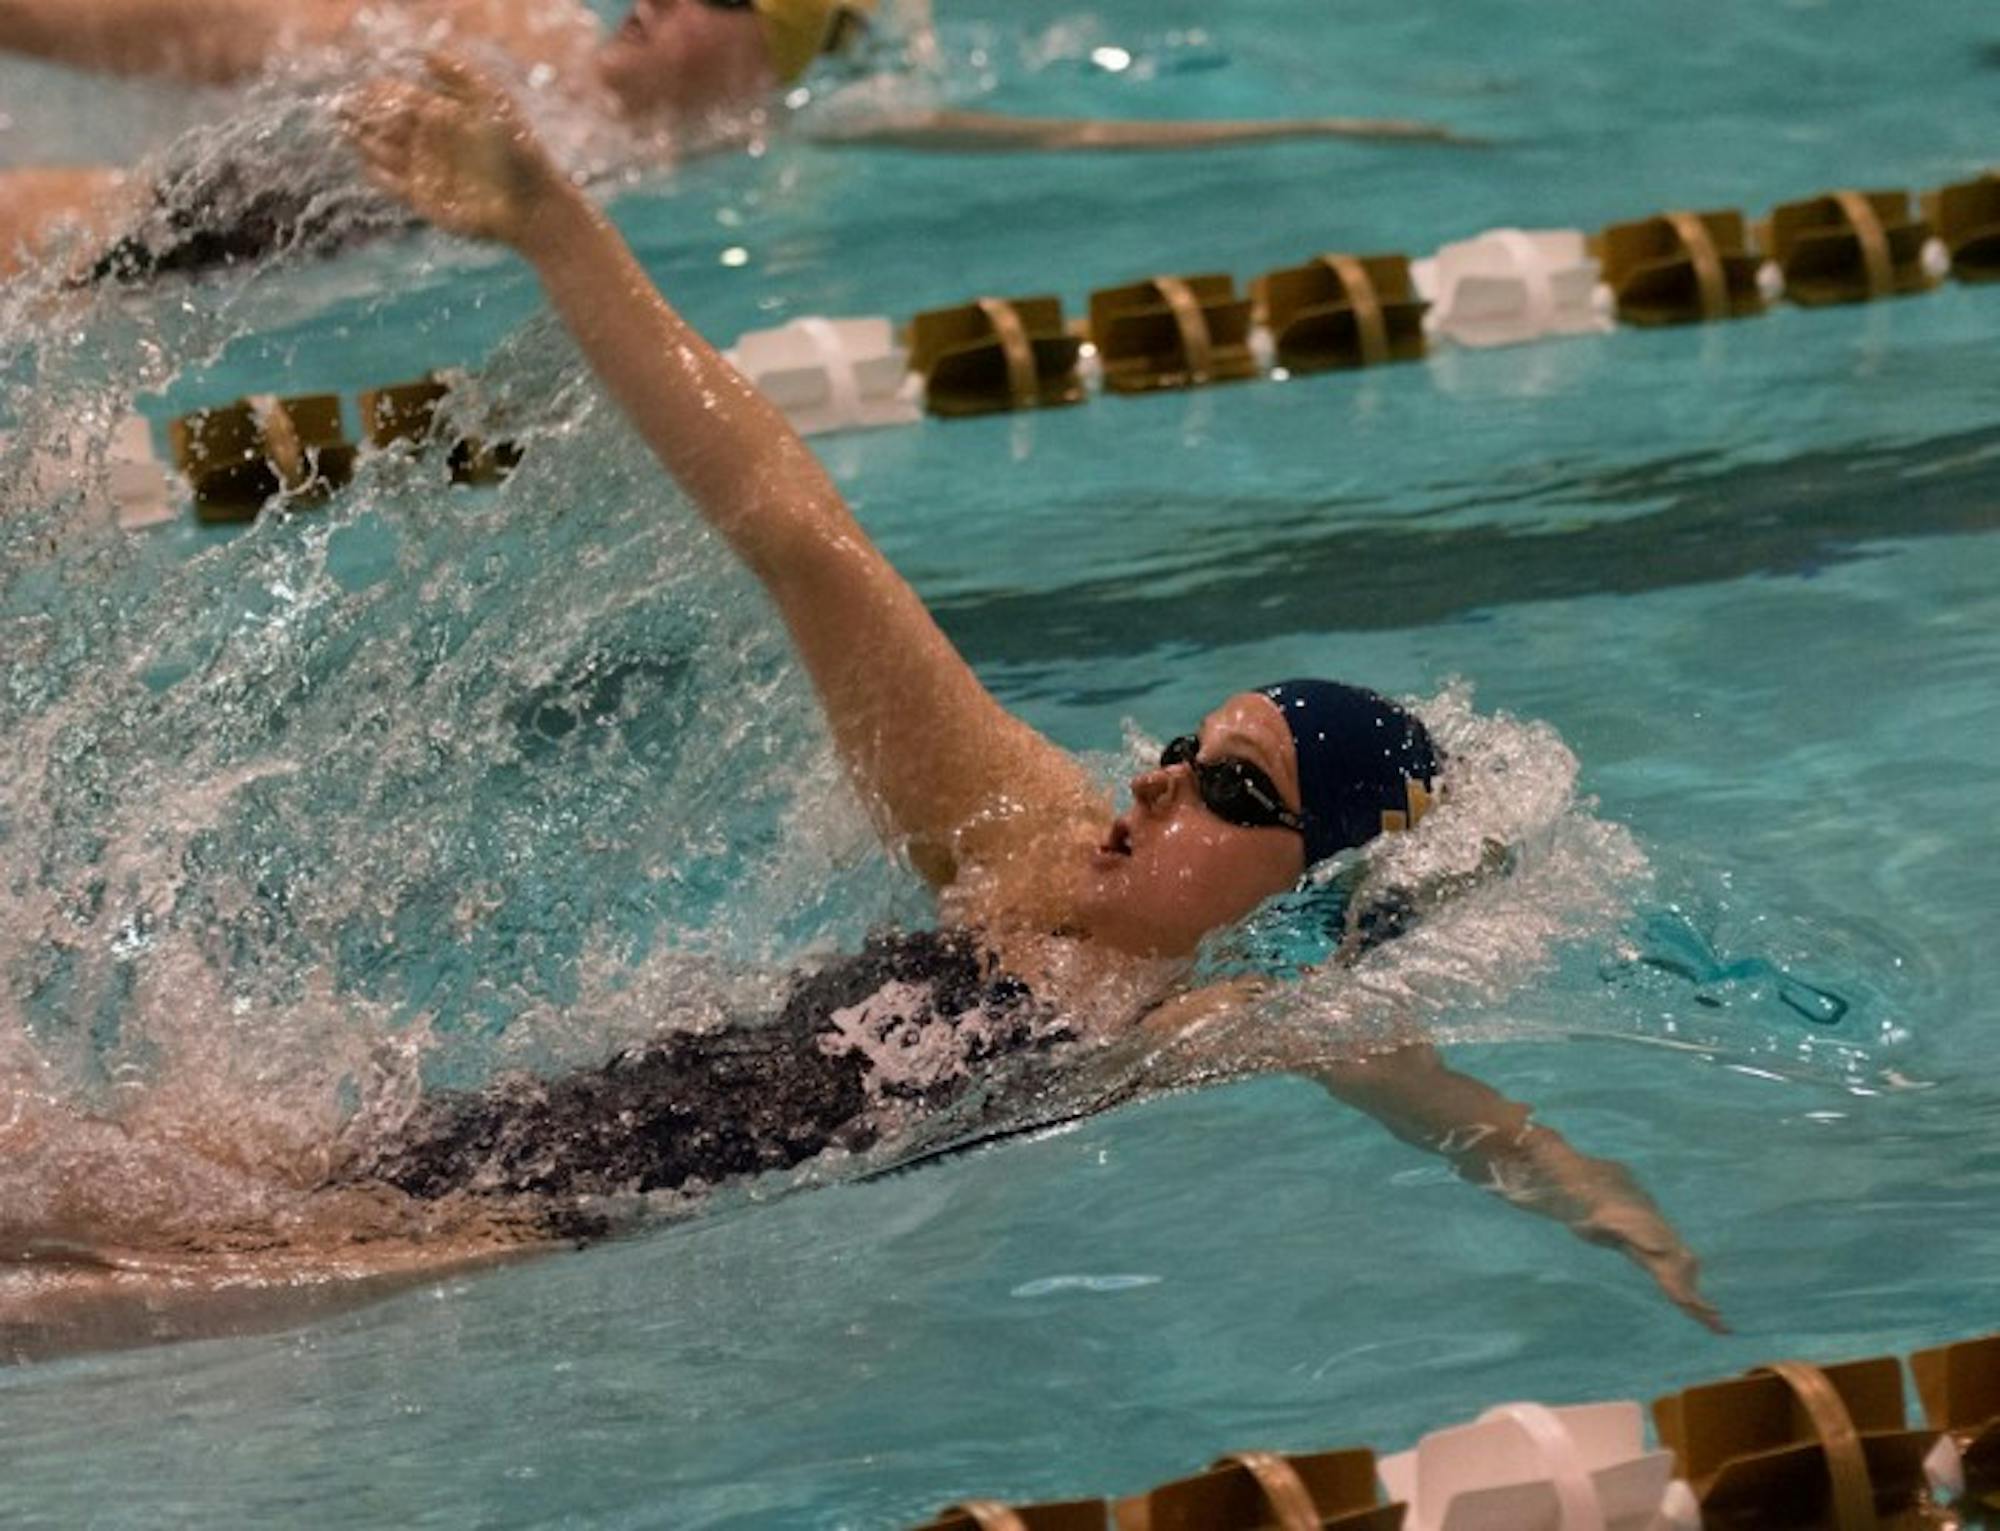 Irish sophomore Katie Miller competes in the backstroke during Notre Dame’s 170-128 loss to Purdue on Nov. 1 at Rolfs Aquatic Center. Miller finished in the top five of three races at the meet.